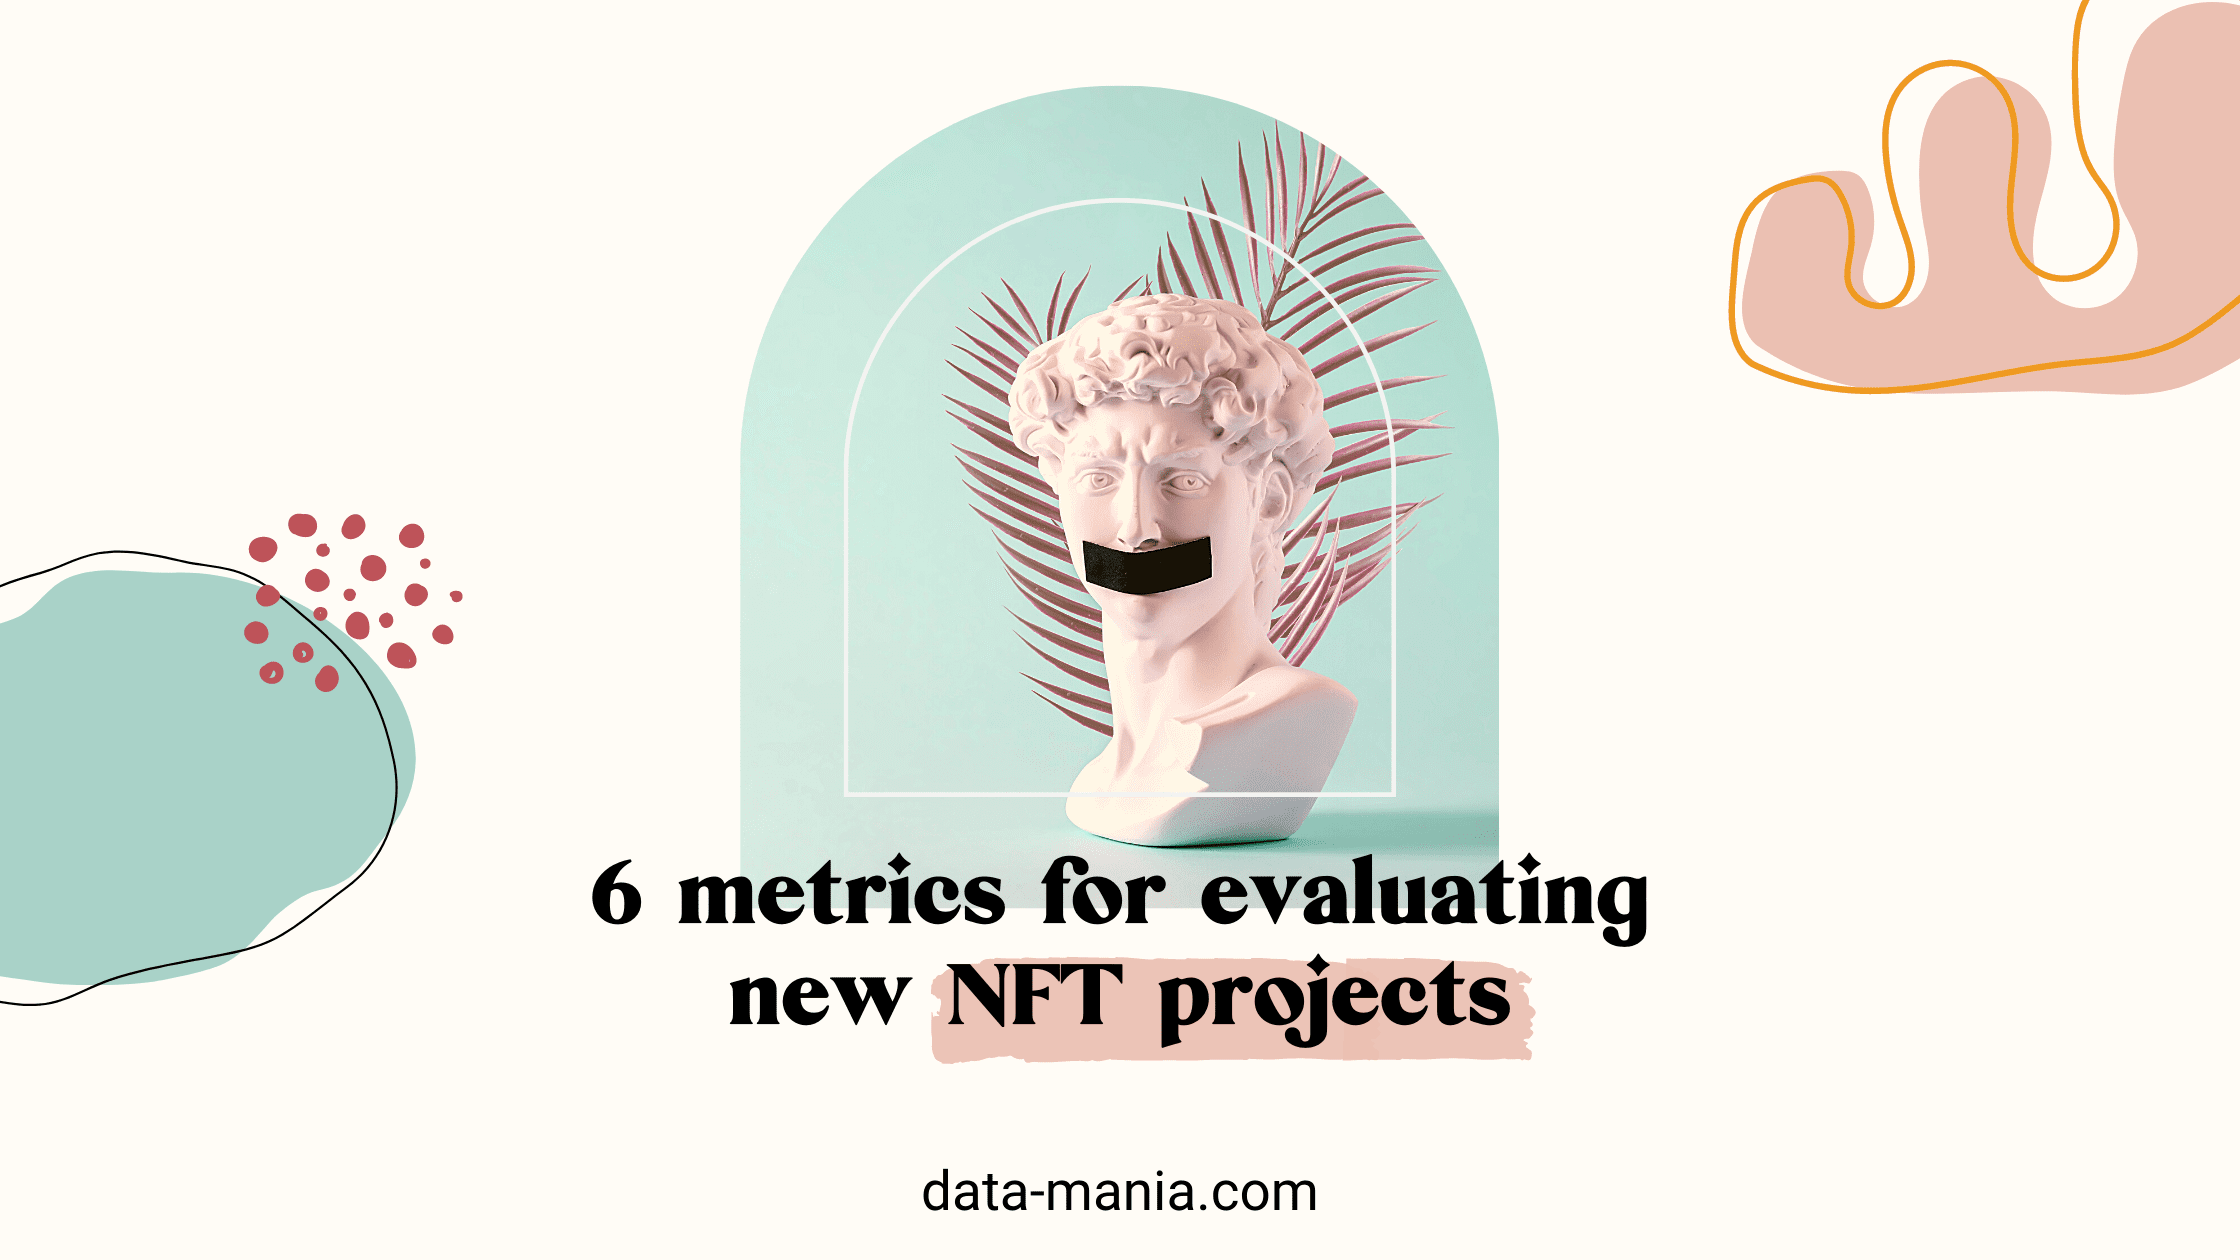 The 6 metrics for evaluating new NFT projects